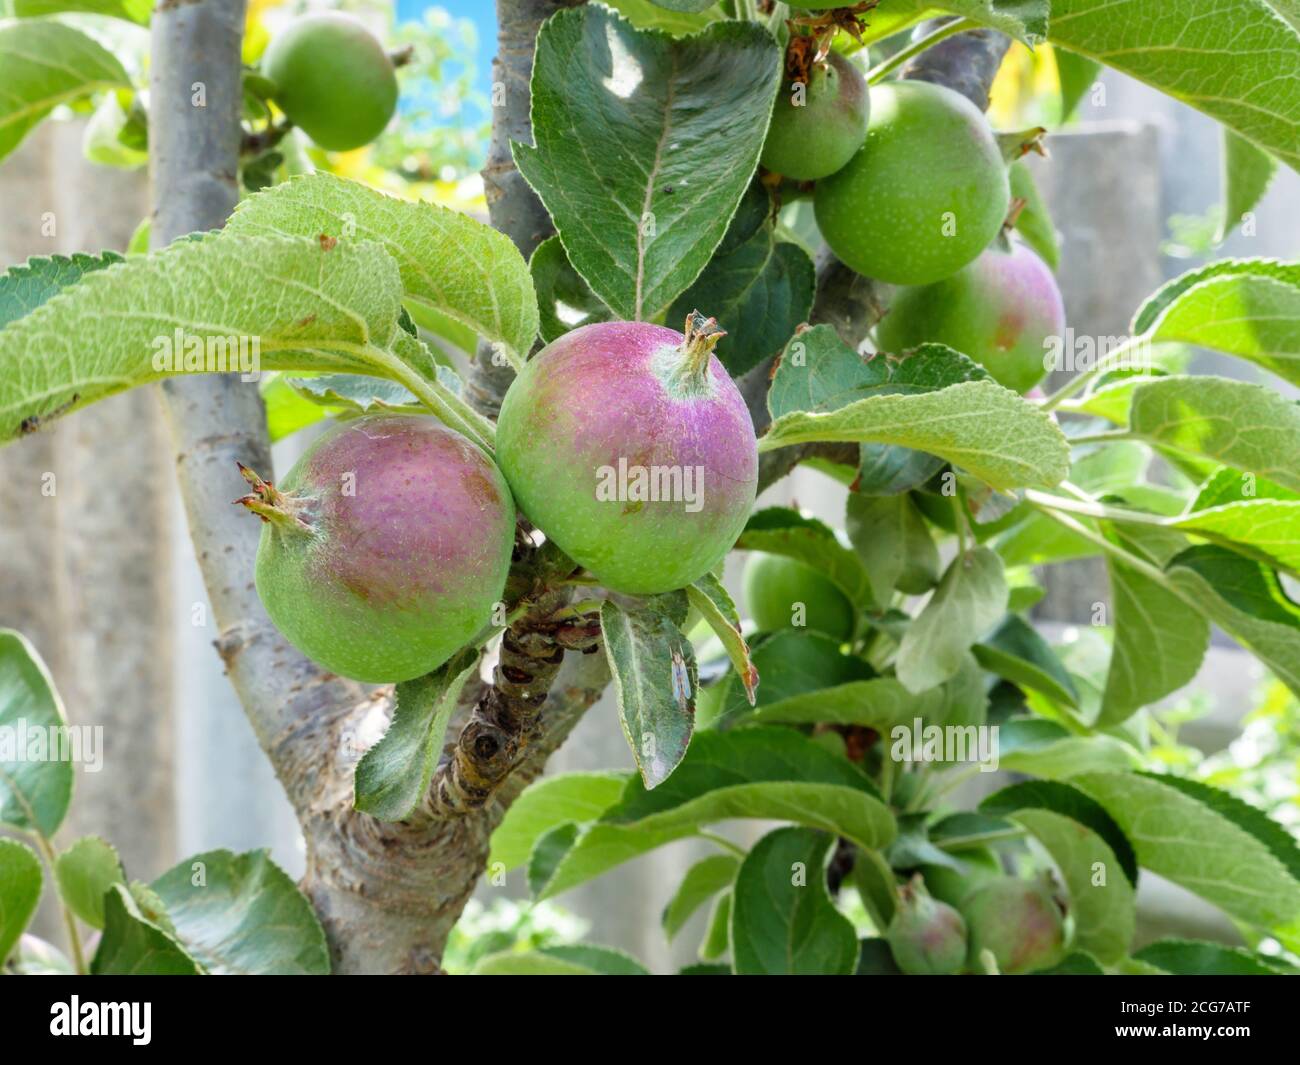 Fresh Red Apples Growing Tree Harvest Sustainable Farm Sunny Day Stock  Photo by ©PeopleImages.com 585441600